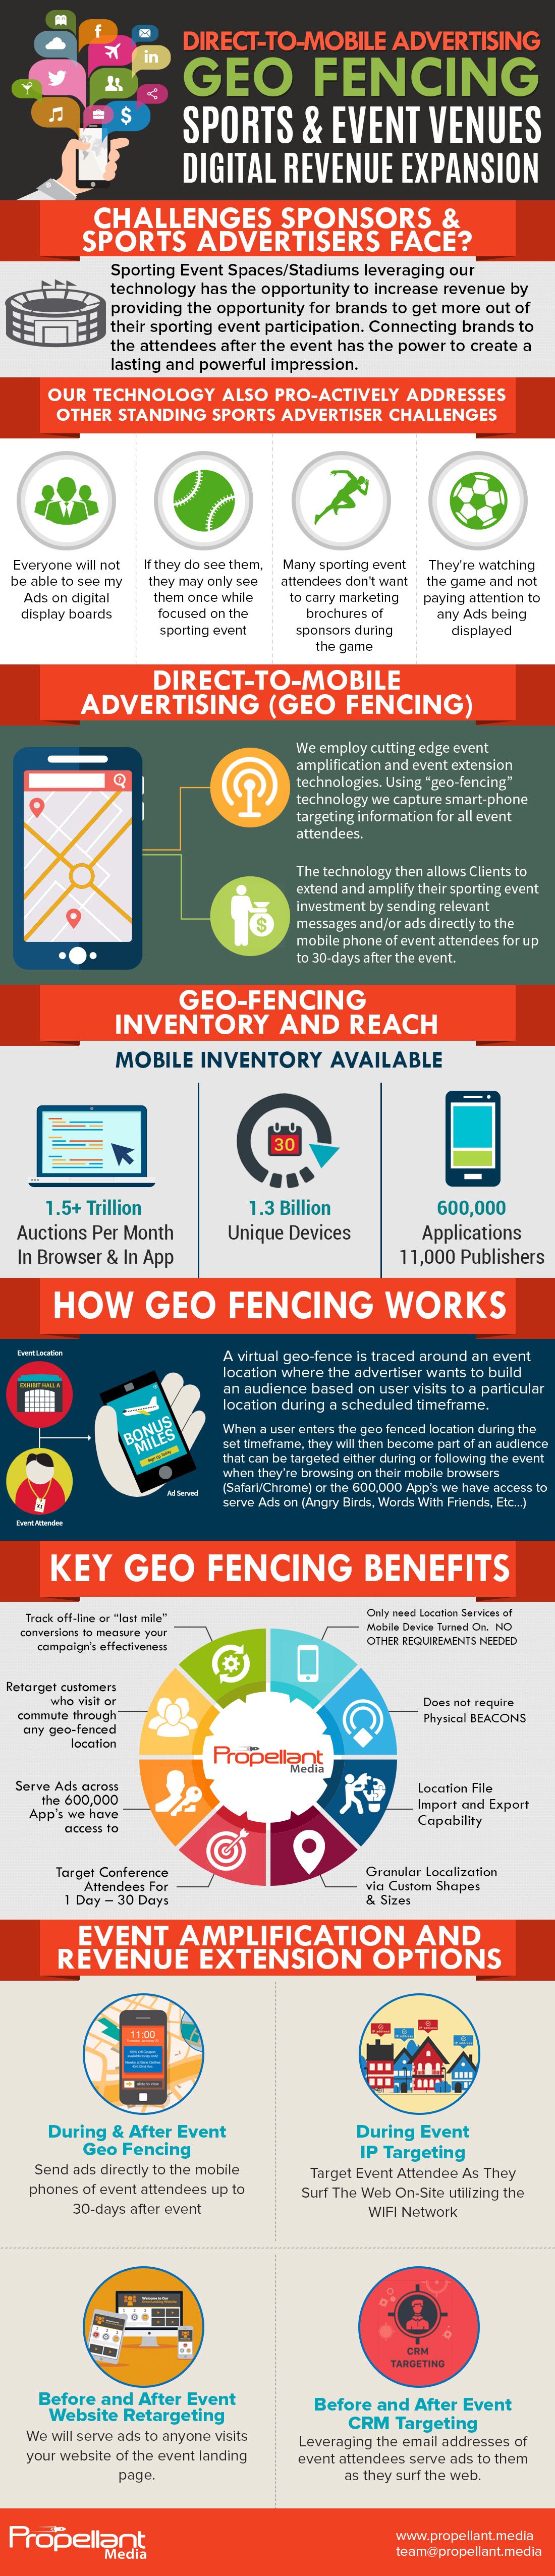 sports marketing geofencing infographic